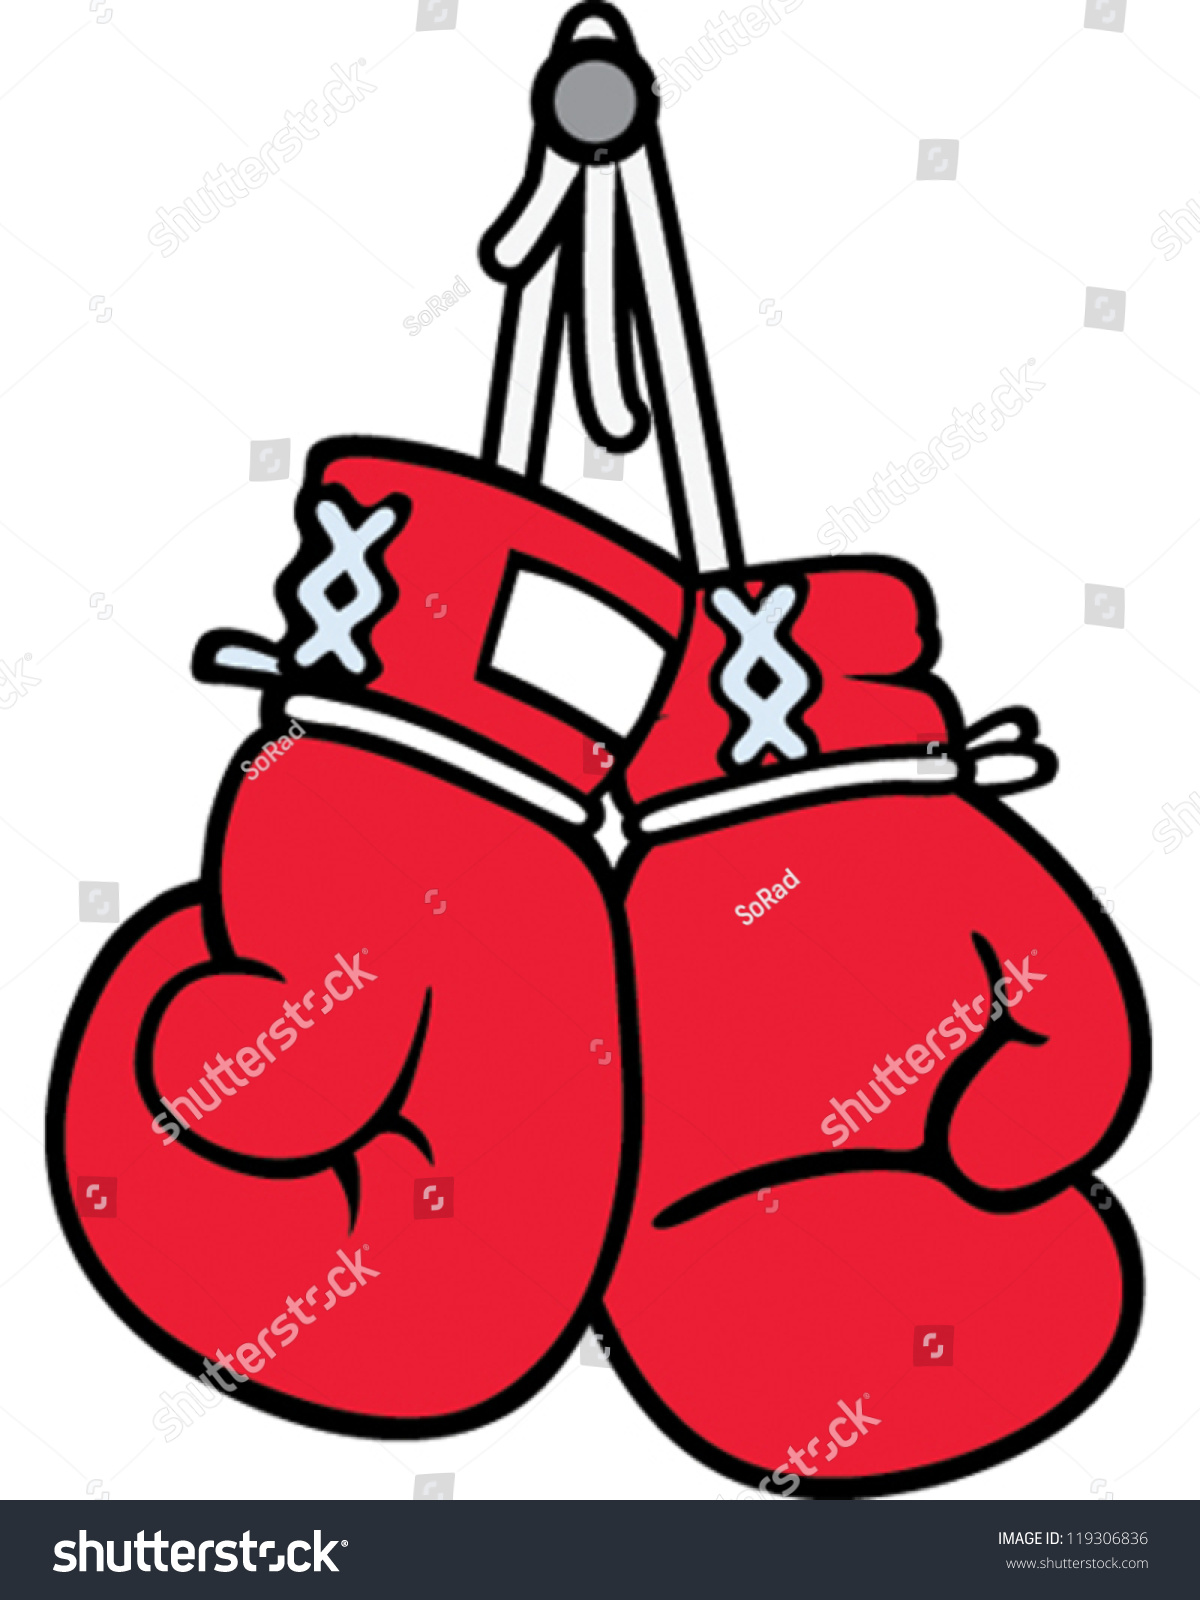 boxing clipart free download - photo #25